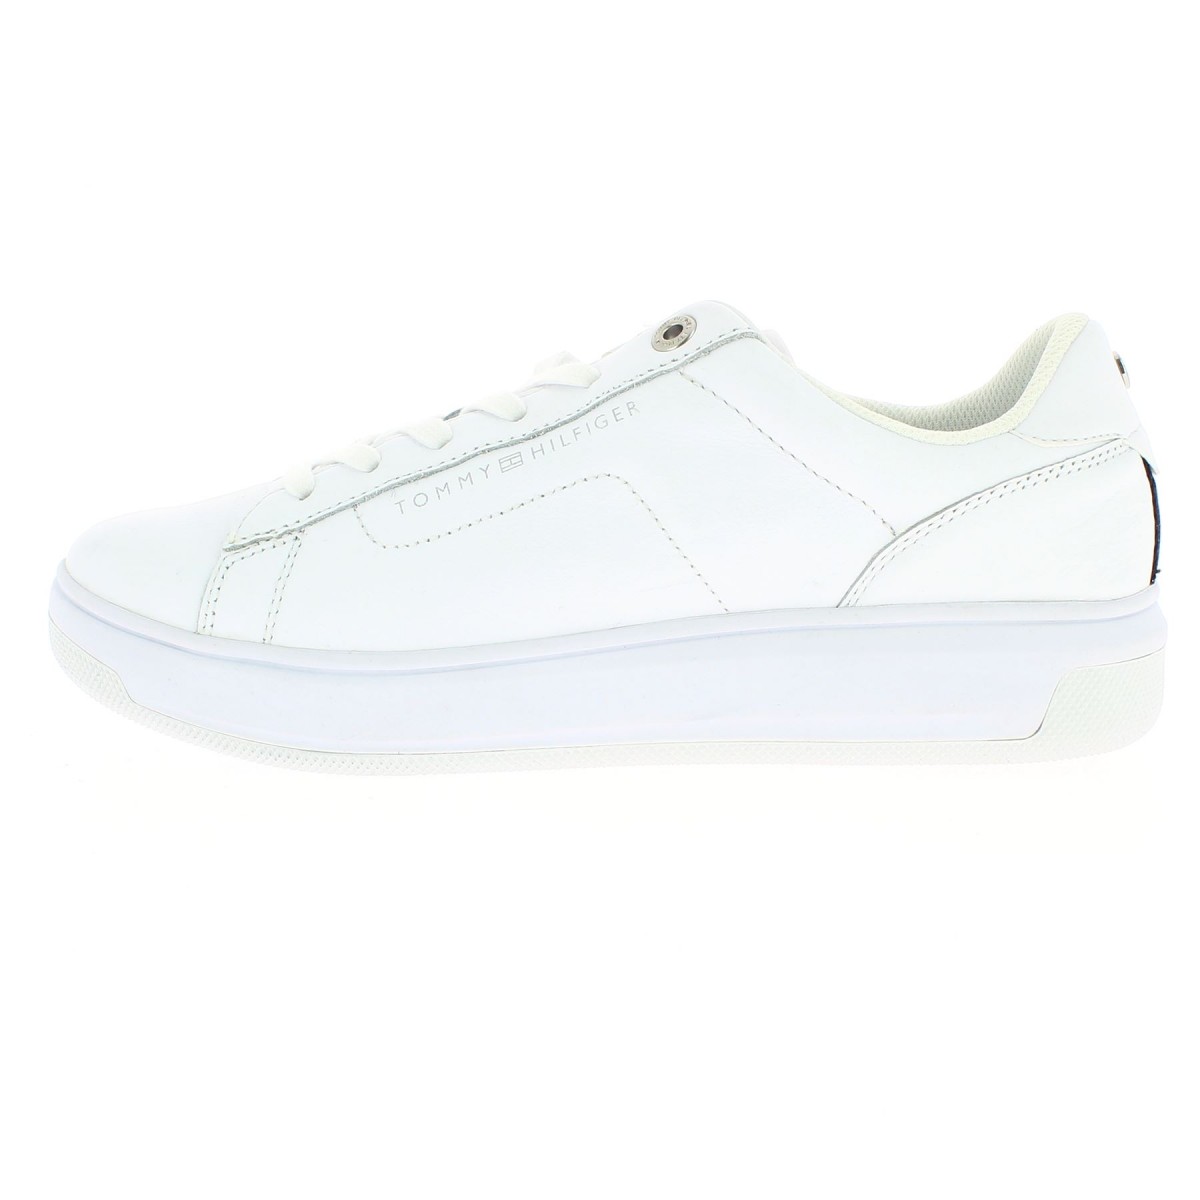 BASKET FEMME TOMMY HILFIGER LEATHER BLANCHE- MATIERE NOBLE 59€